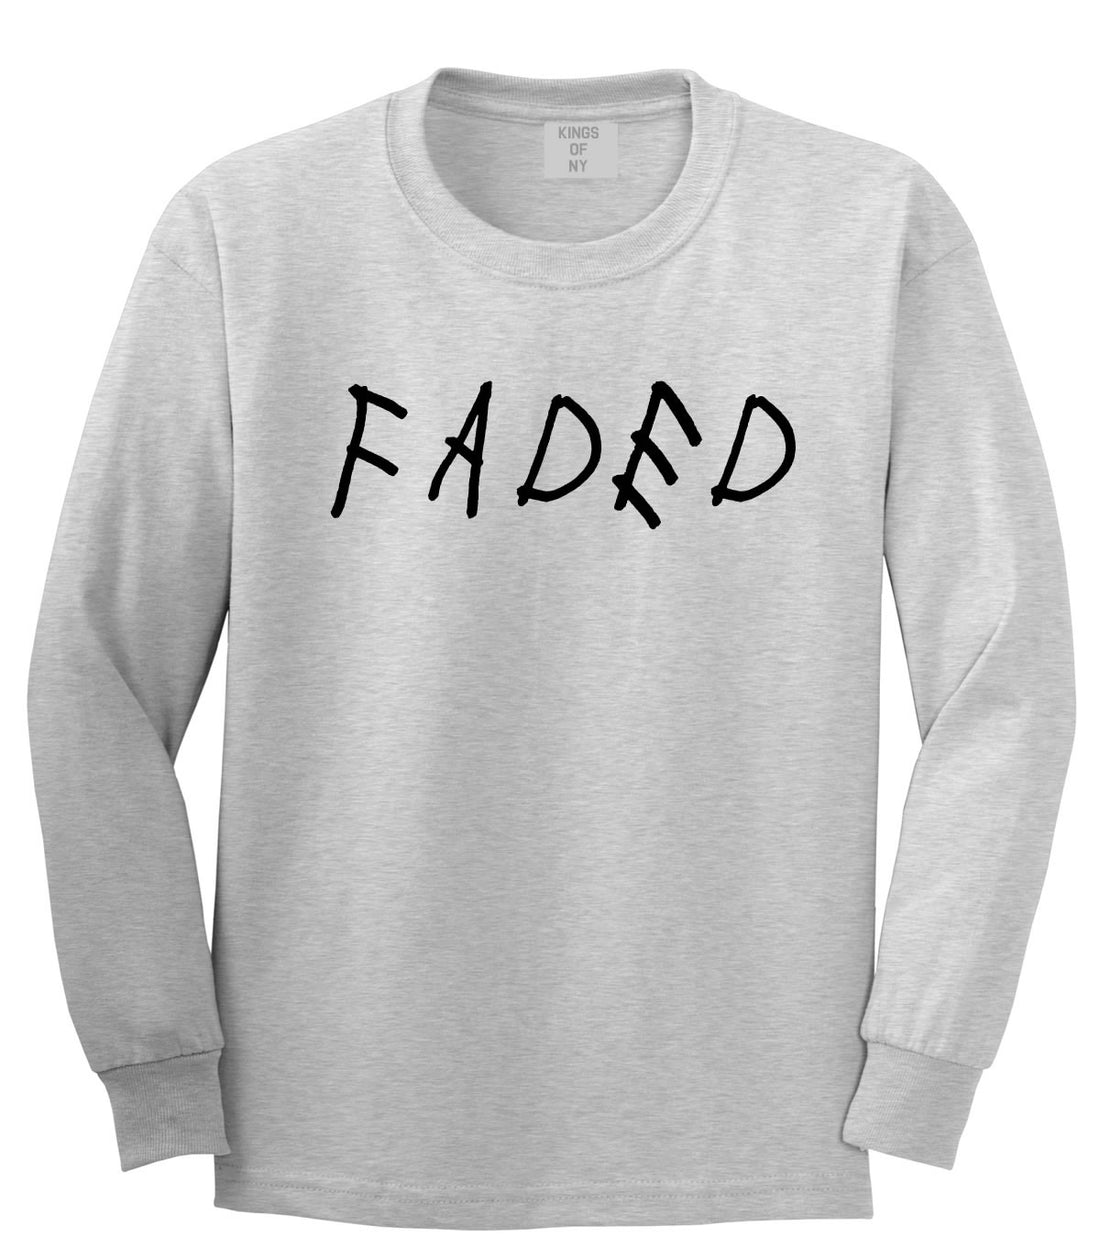 Faded Woes Long Sleeve T-Shirt